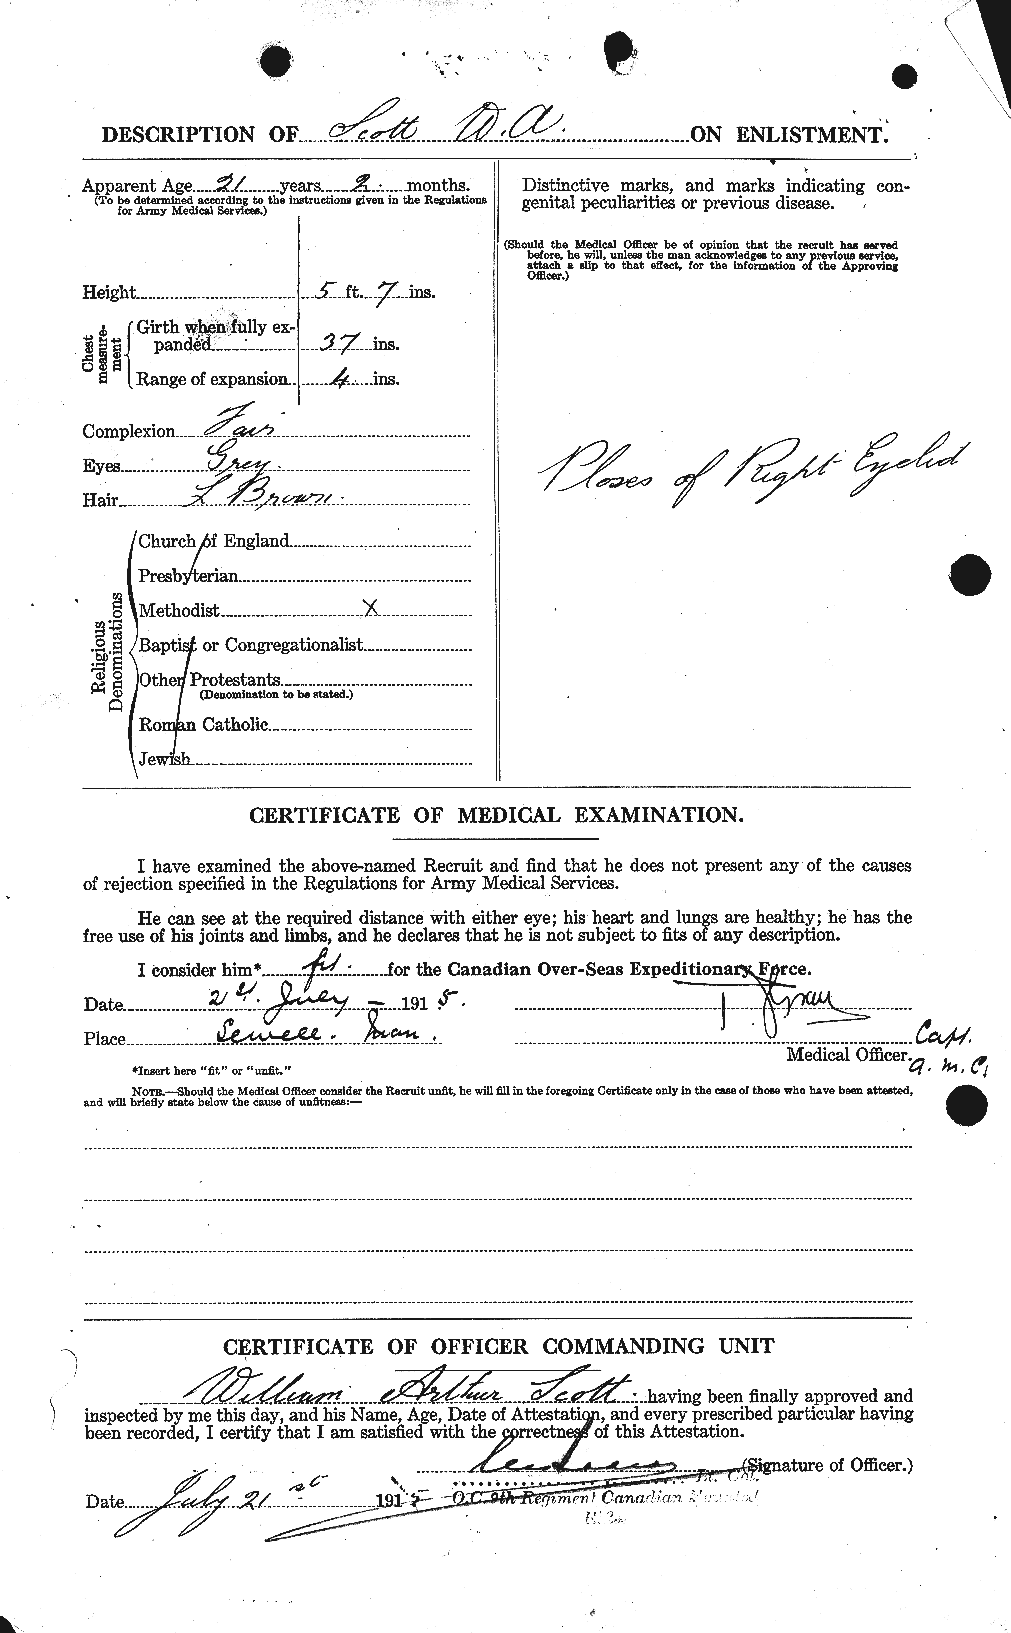 Personnel Records of the First World War - CEF 087327b